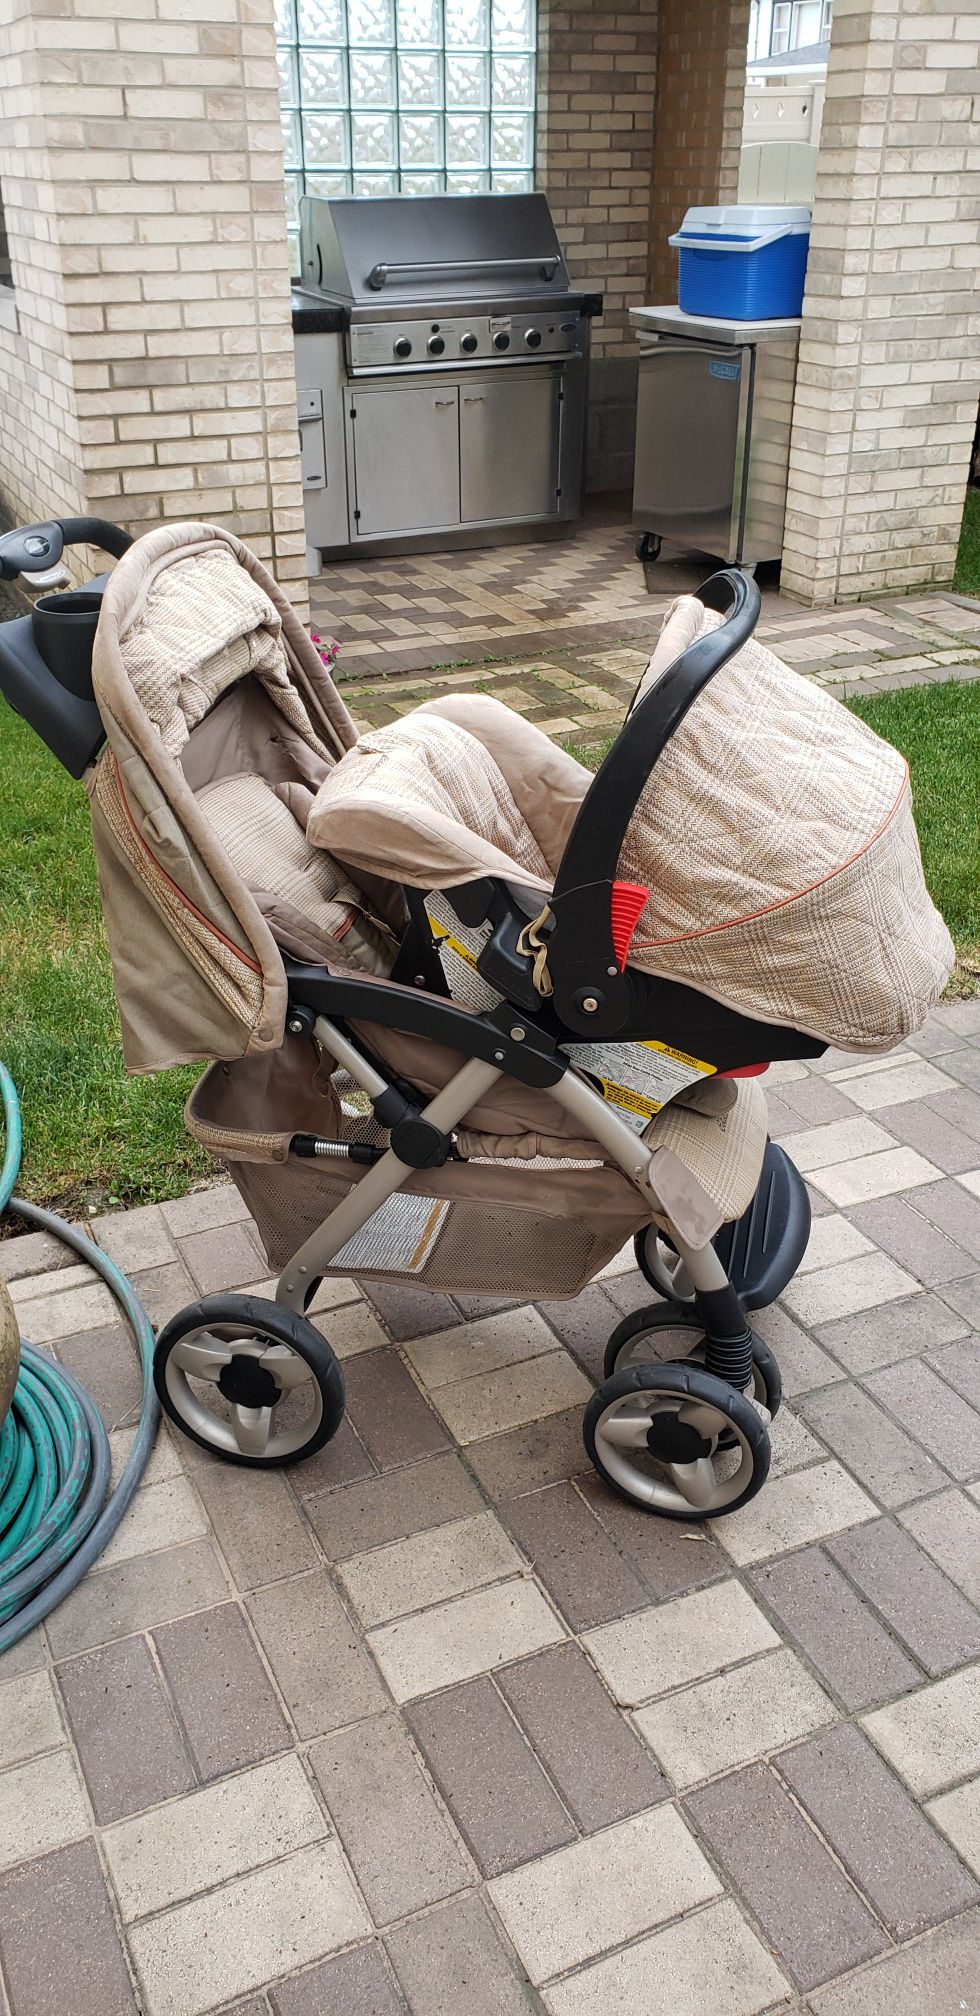 Eddie Bauer stroller with carrier and car seat.